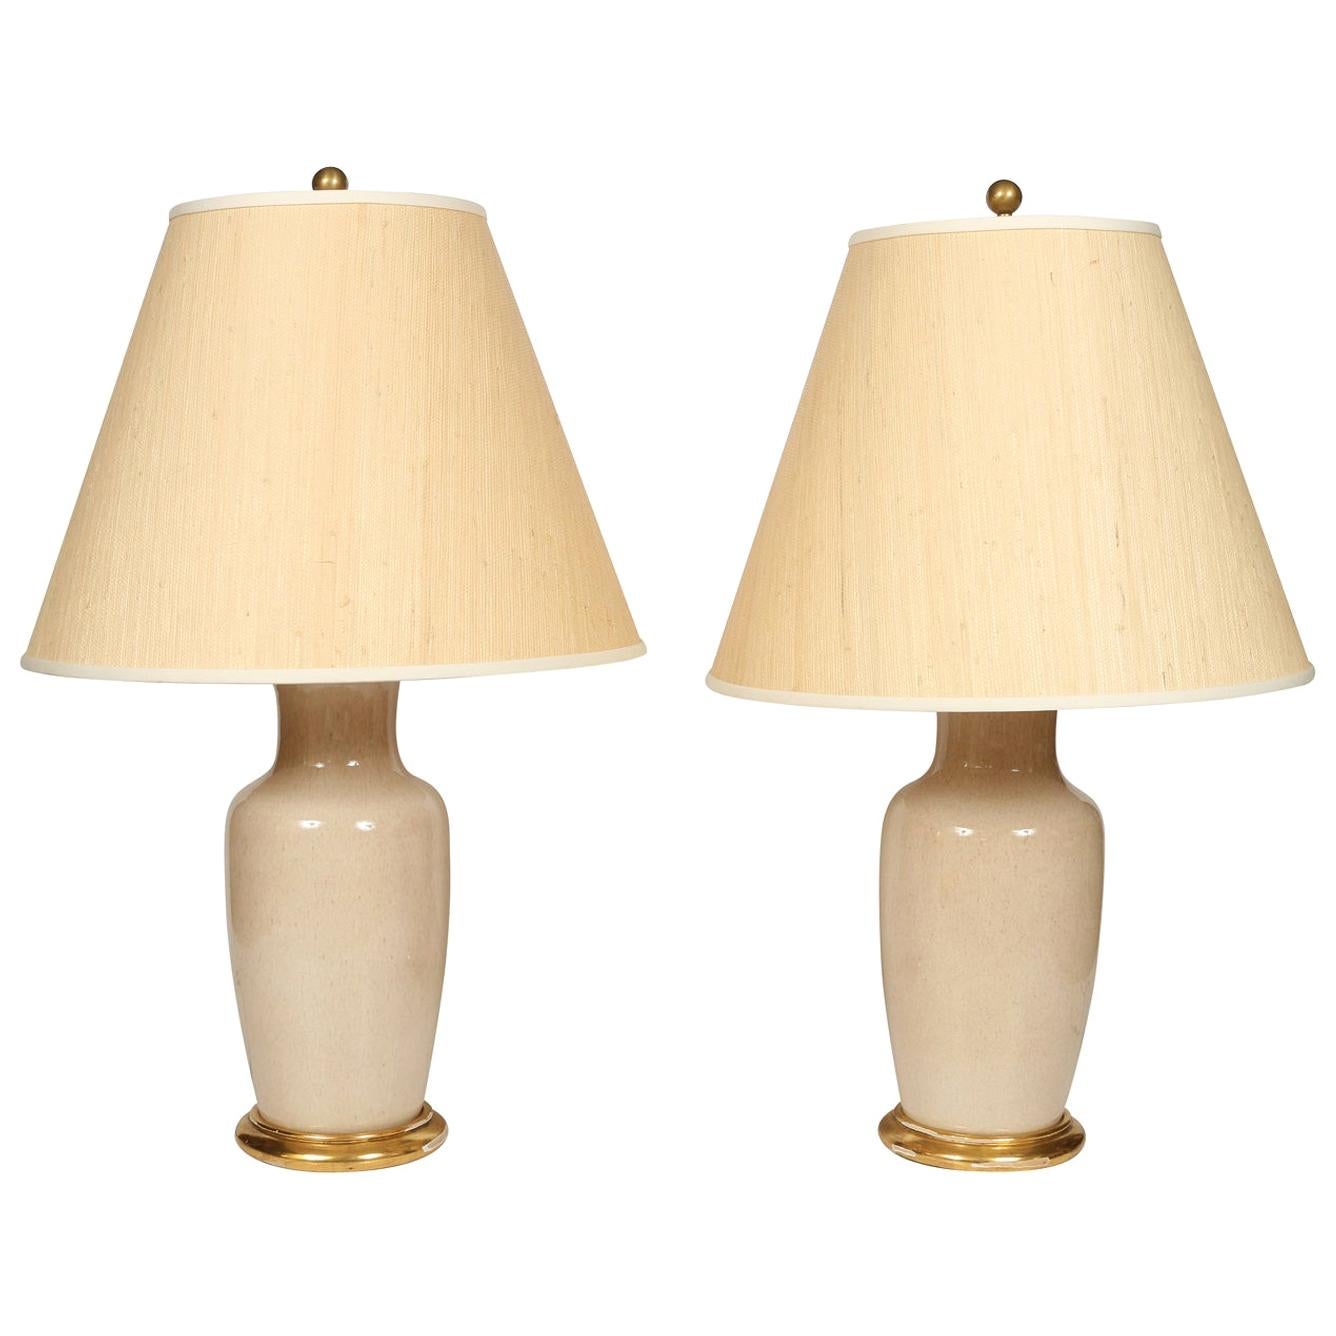 Pair of Custom Cream Porcelain Lamps with Gilt Bases